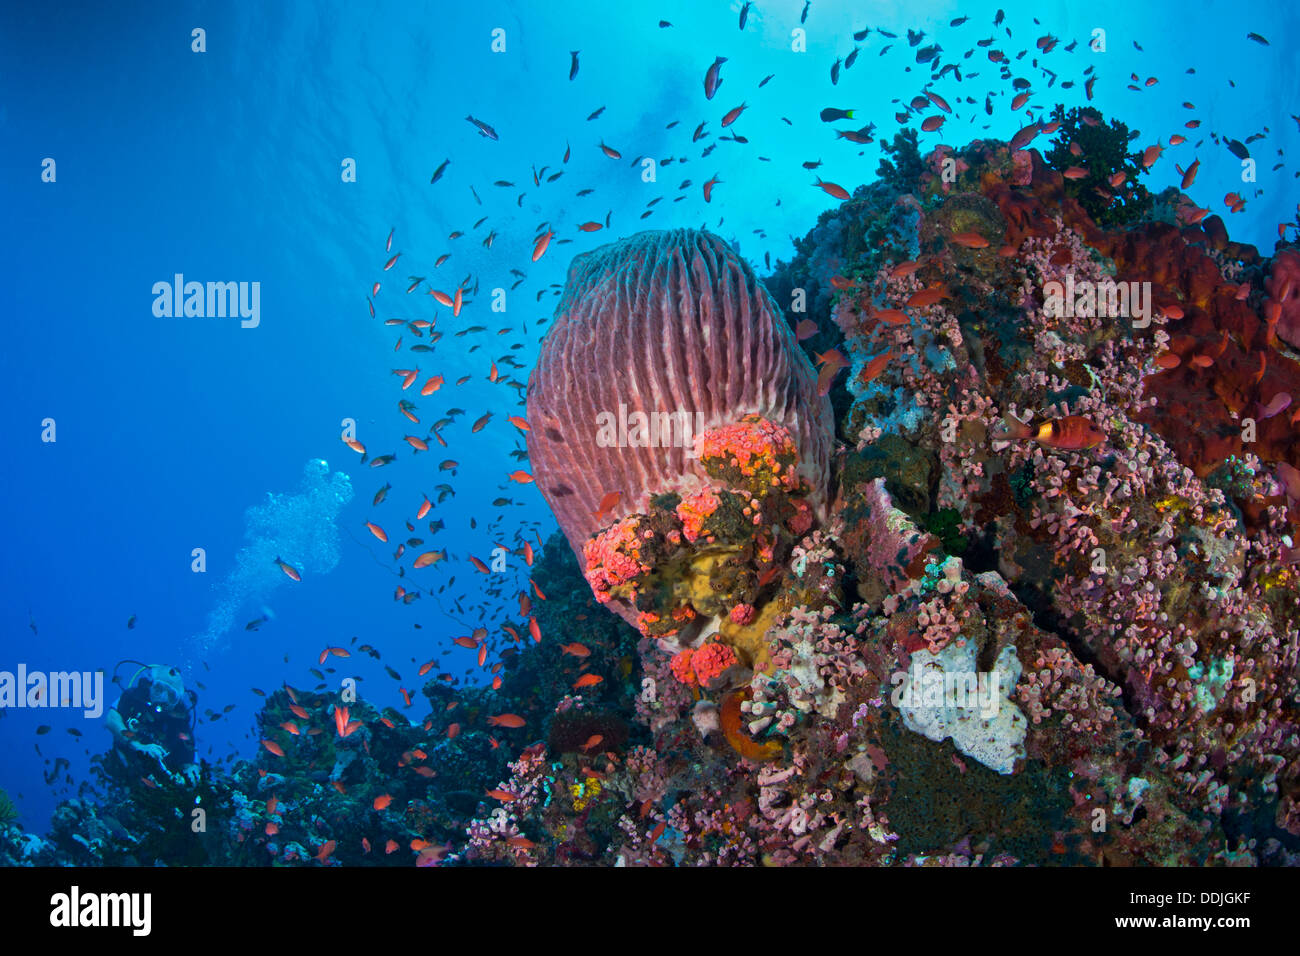 Pristine coral reef with red barrel sponge and halo of tropical fish on Verde Island, Philippines. Stock Photo